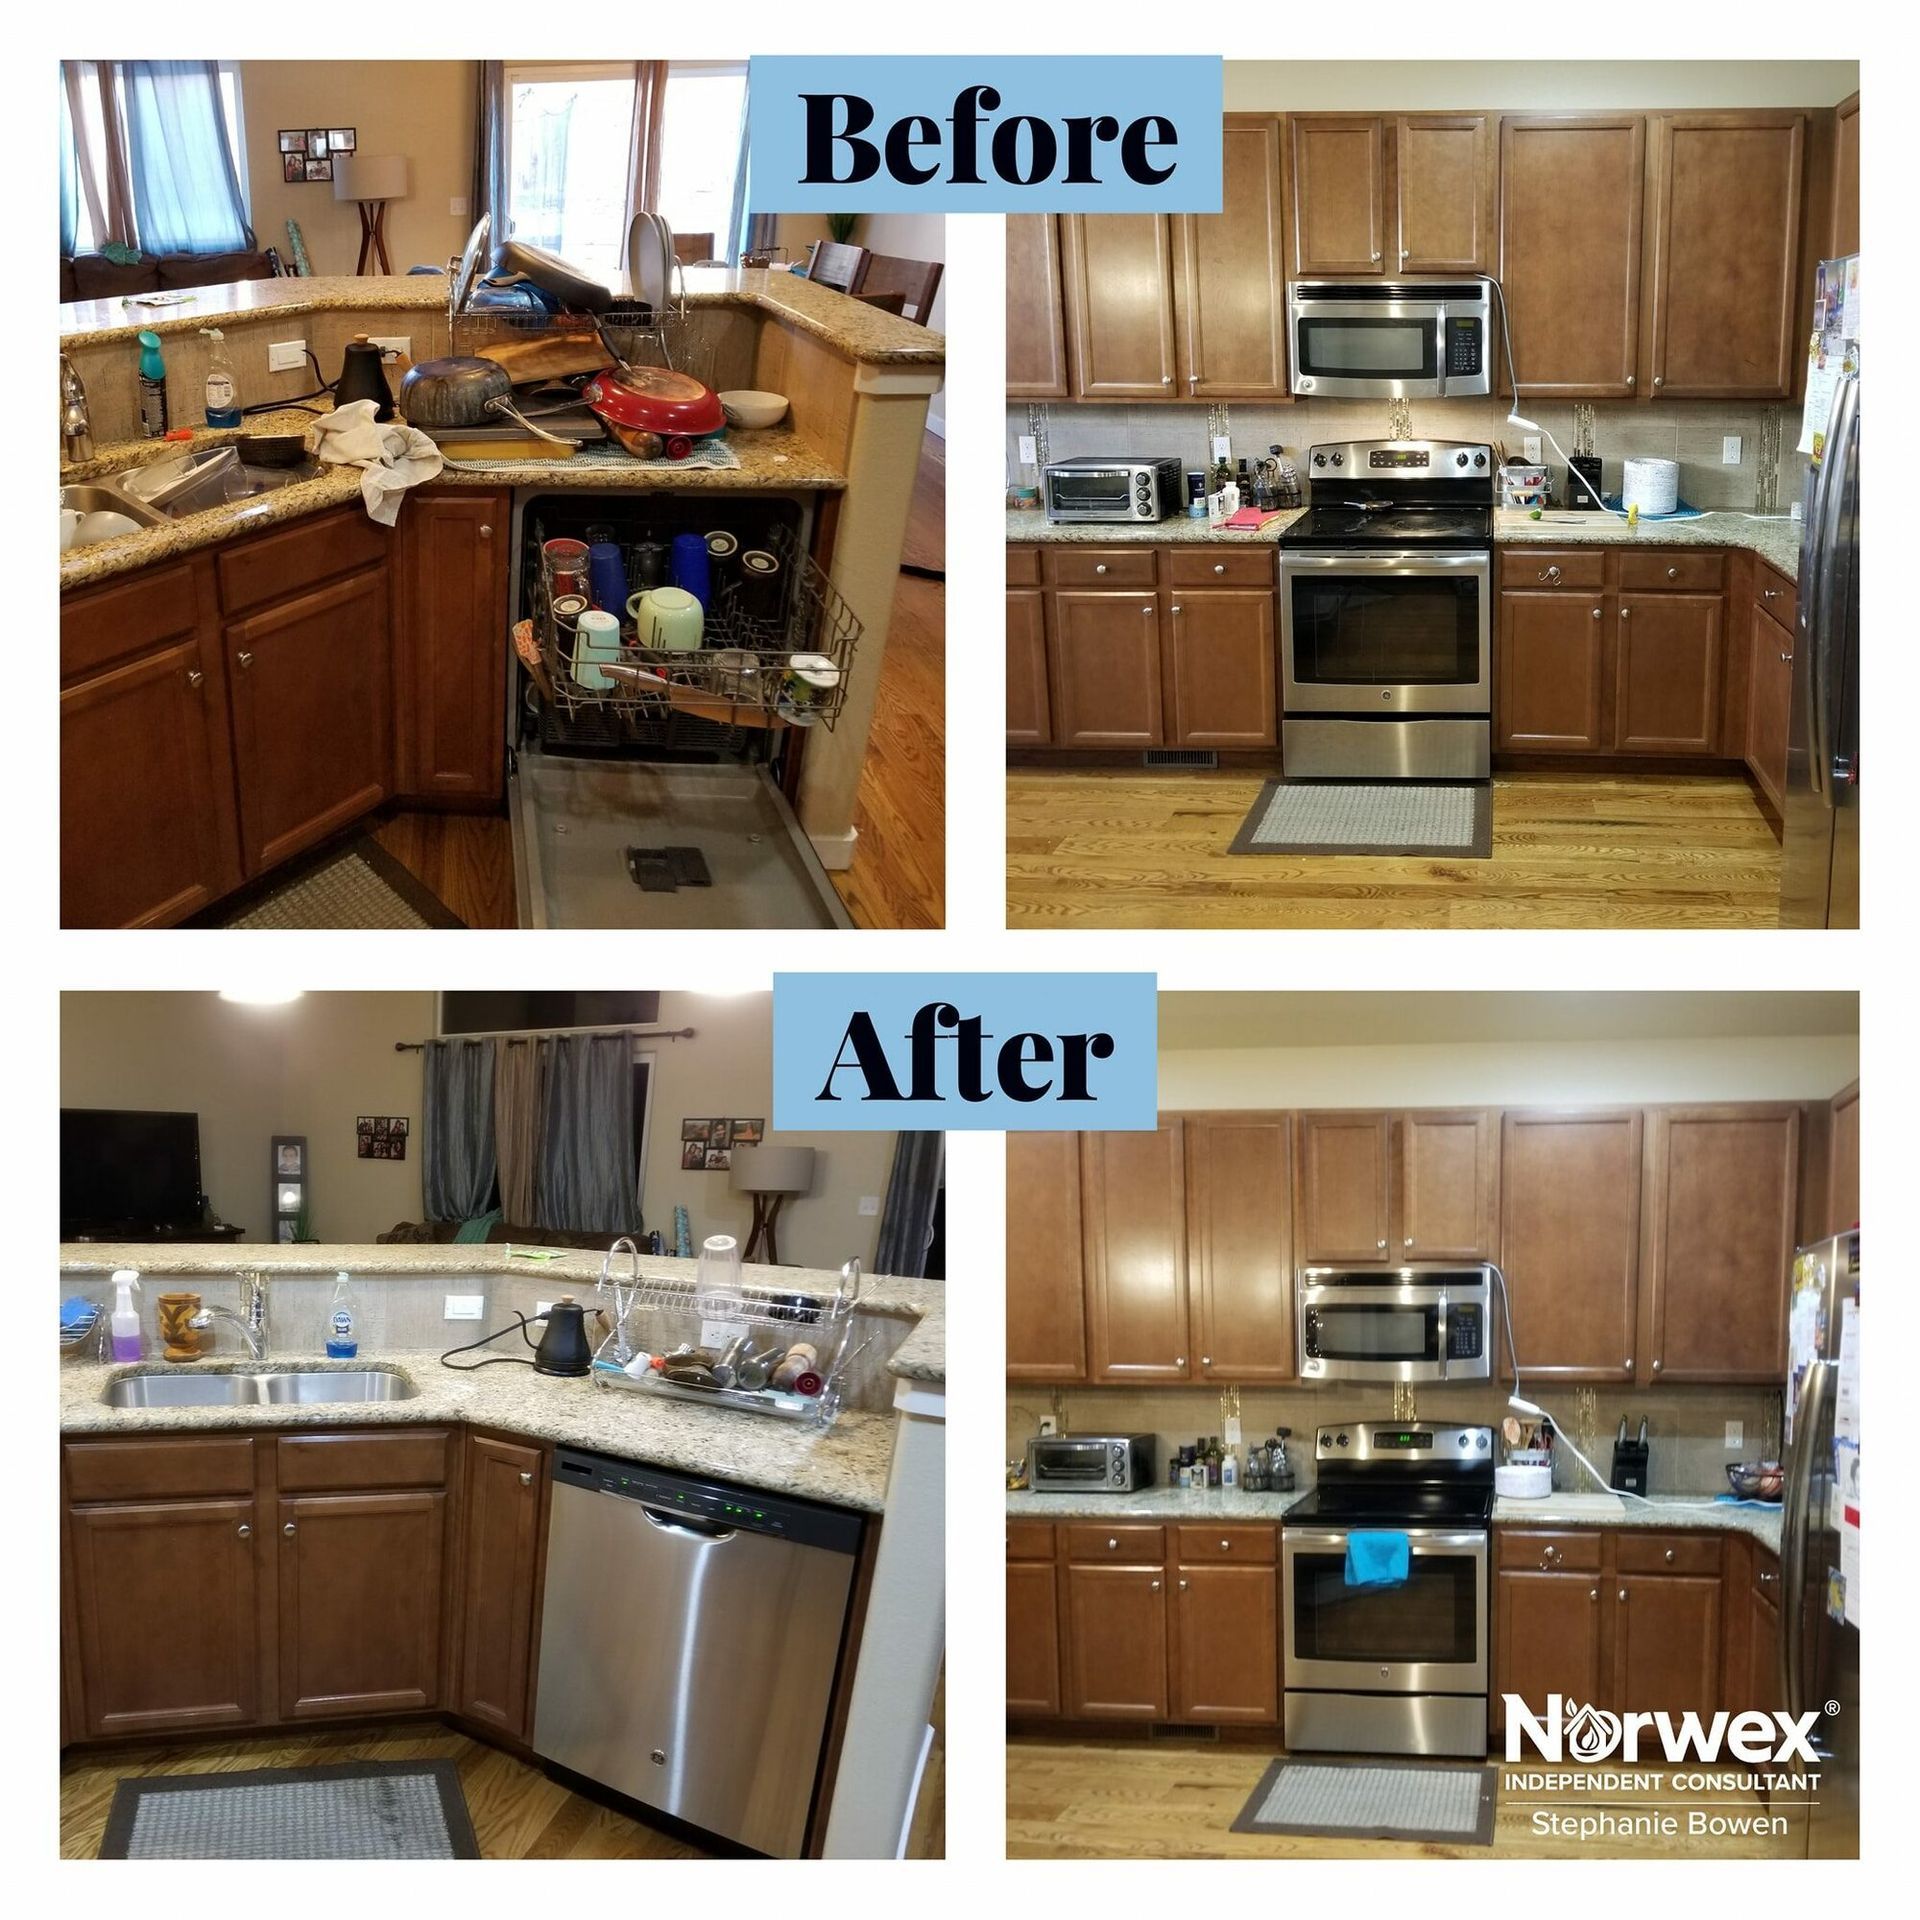 A before and after photo of a kitchen with stainless steel appliances